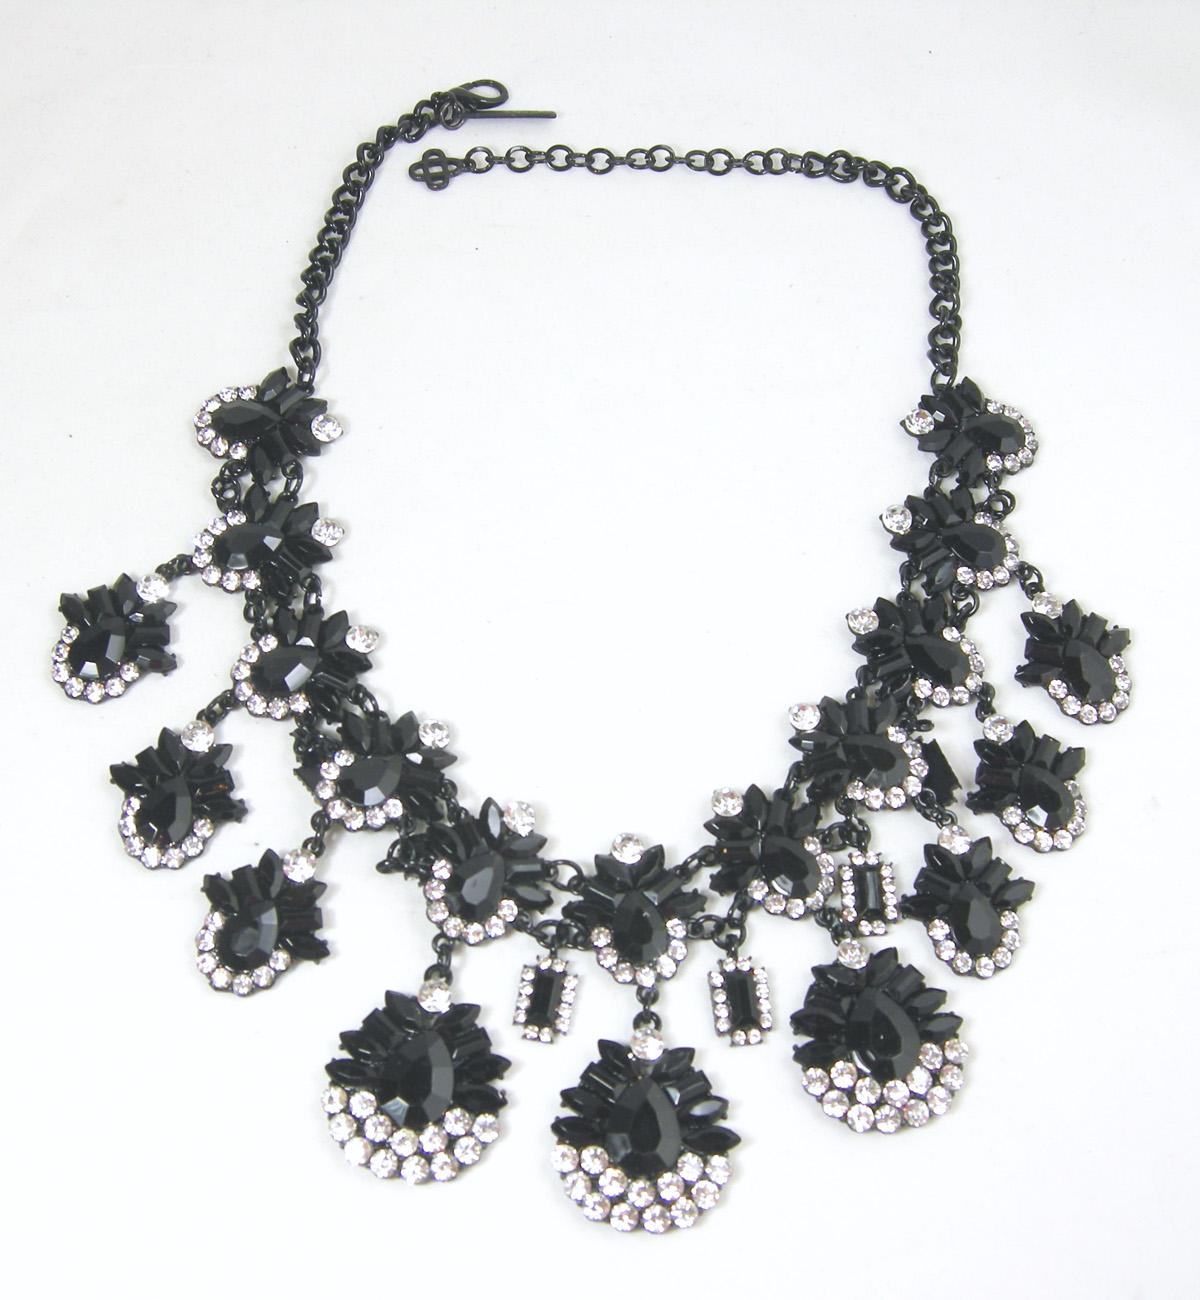 This dramatic Oscar de la Renta Runway necklace is designed with black glass stone teardrops in two rows accented with beautiful rhinestones.  The necklace measures 20” with a lobster clasp in a Japanned metal finish.  The teardrops hang down 3”. 